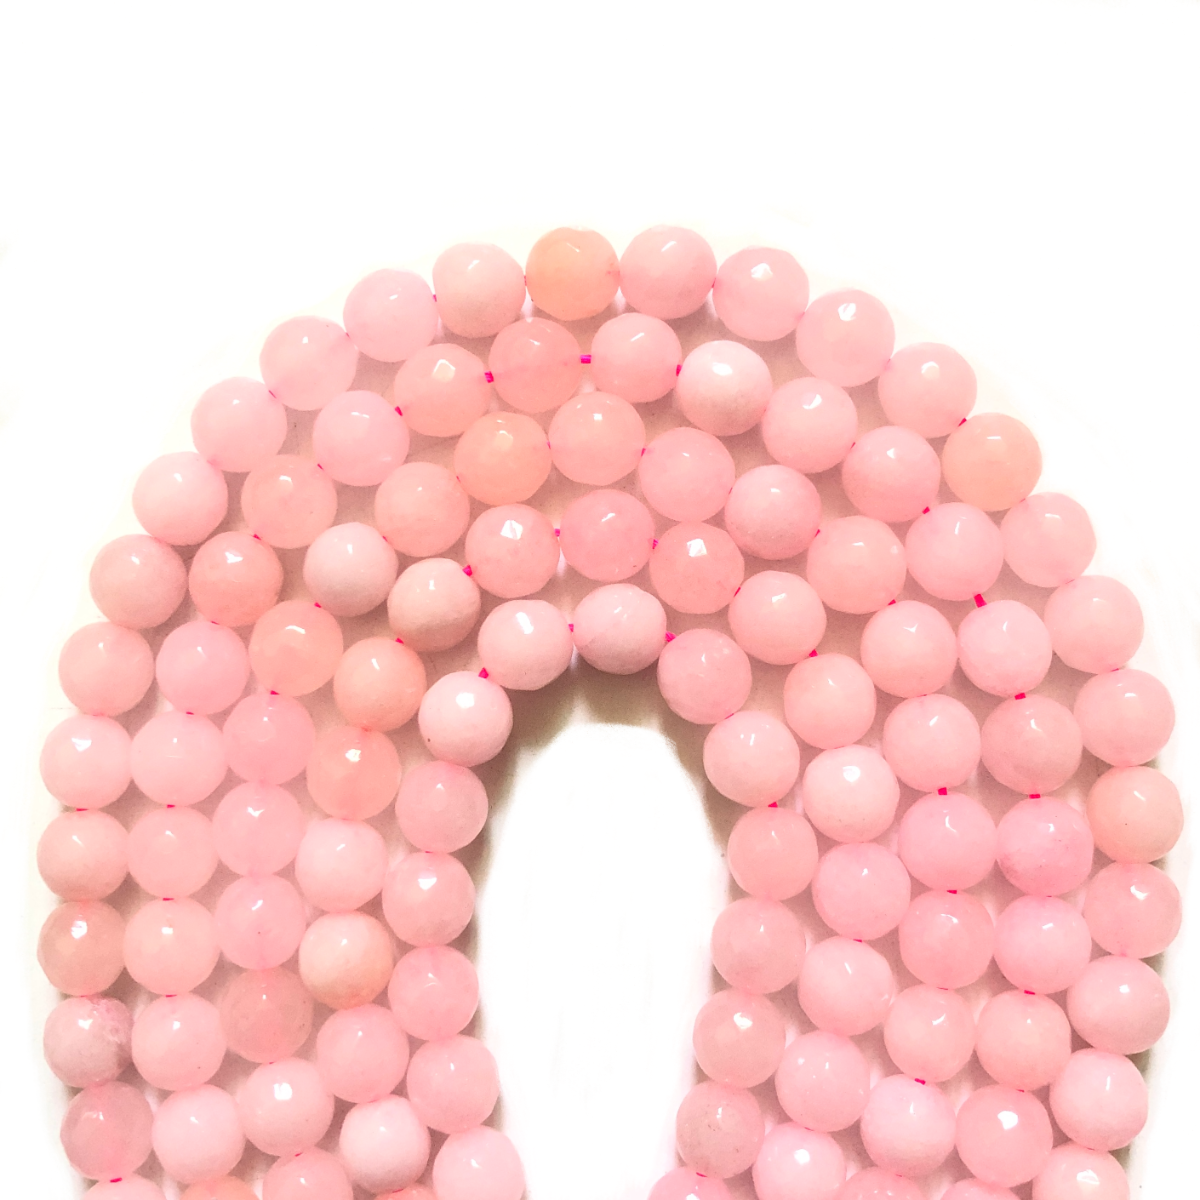 2 Strands/lot 10mm Pink Faceted Jade Stone Beads Stone Beads Breast Cancer Awareness Faceted Jade Beads New Beads Arrivals Charms Beads Beyond